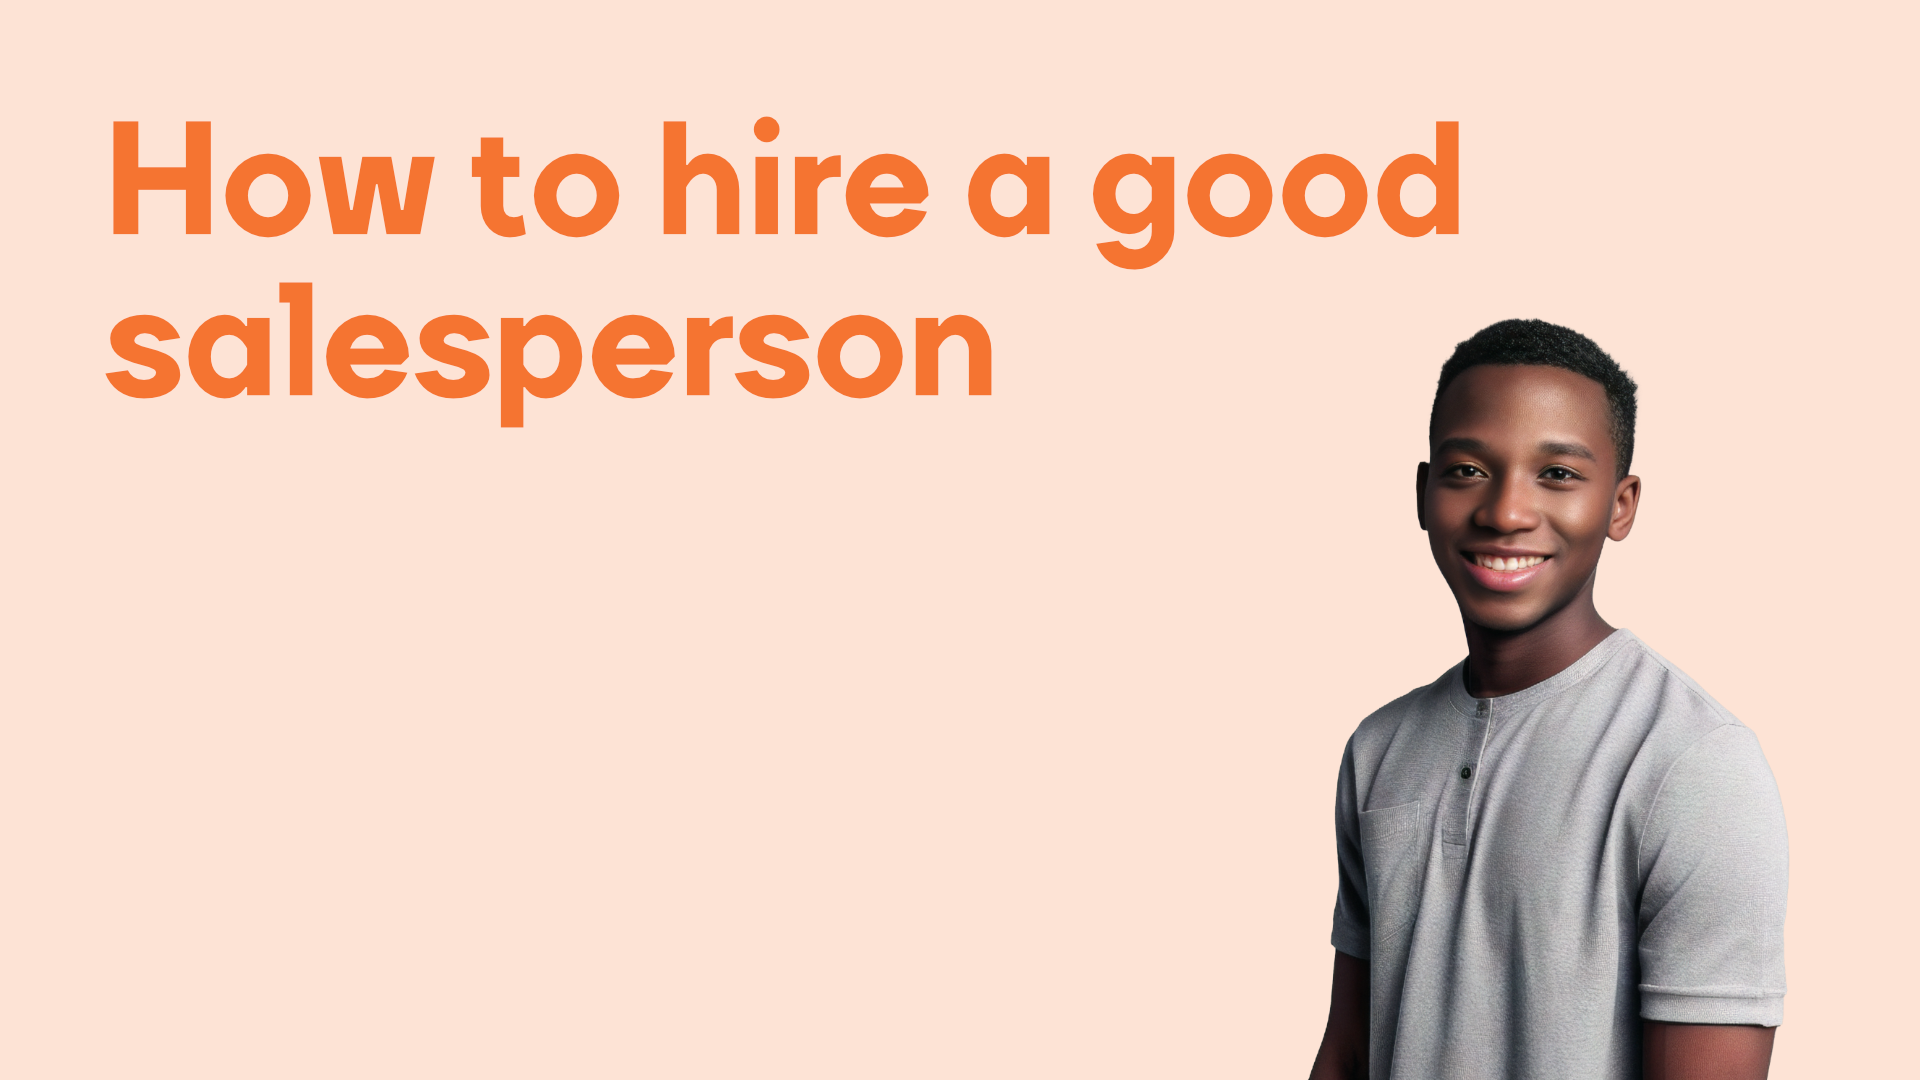 How to hire a good salesperson